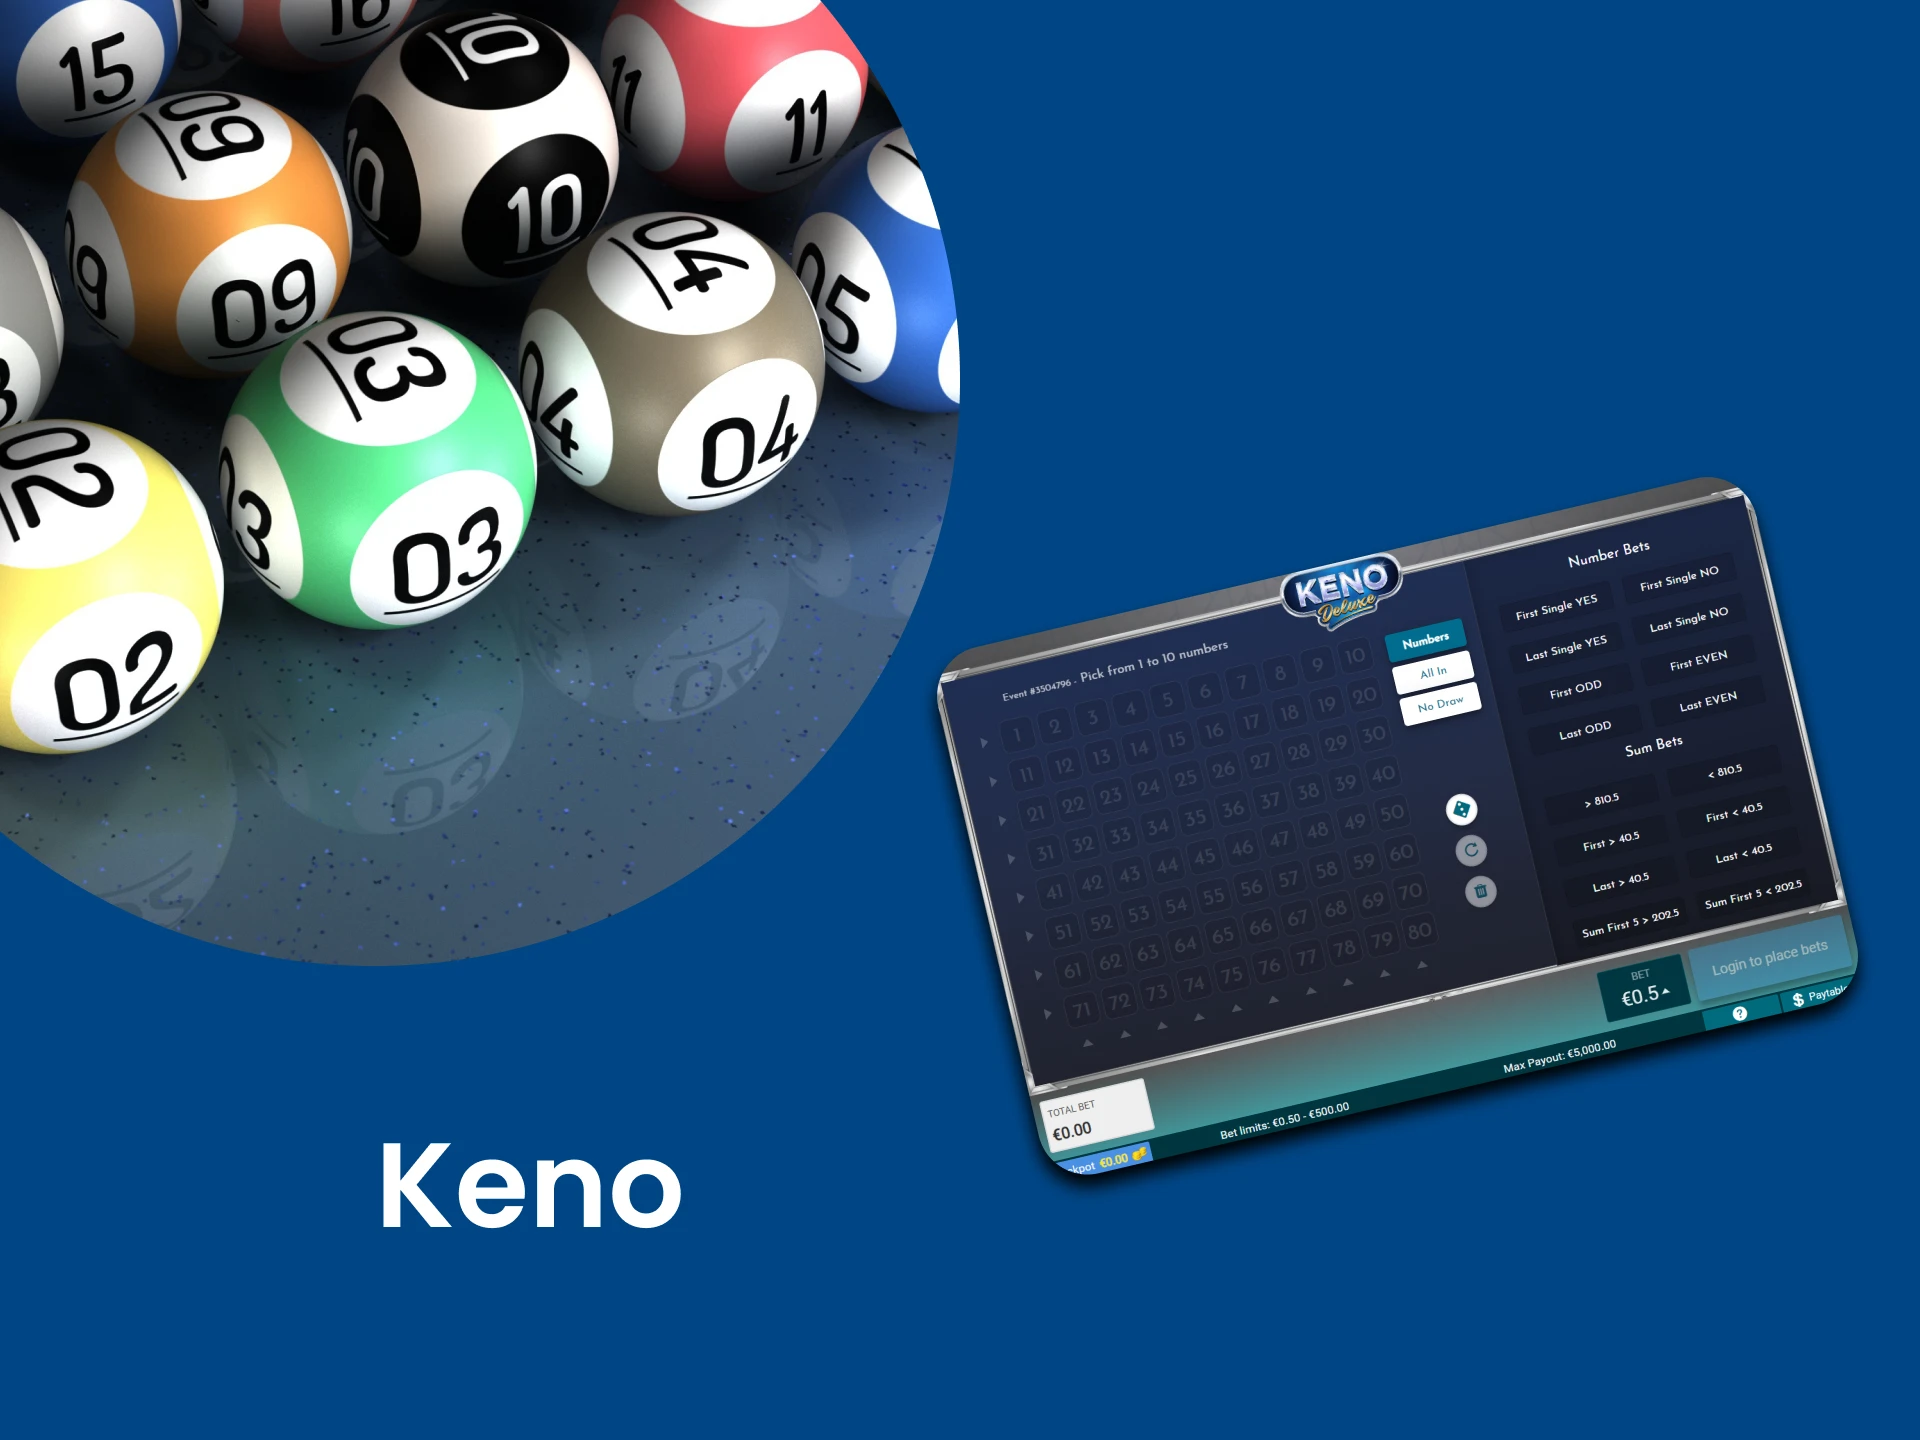 For casino fans, we recommend playing Keno.